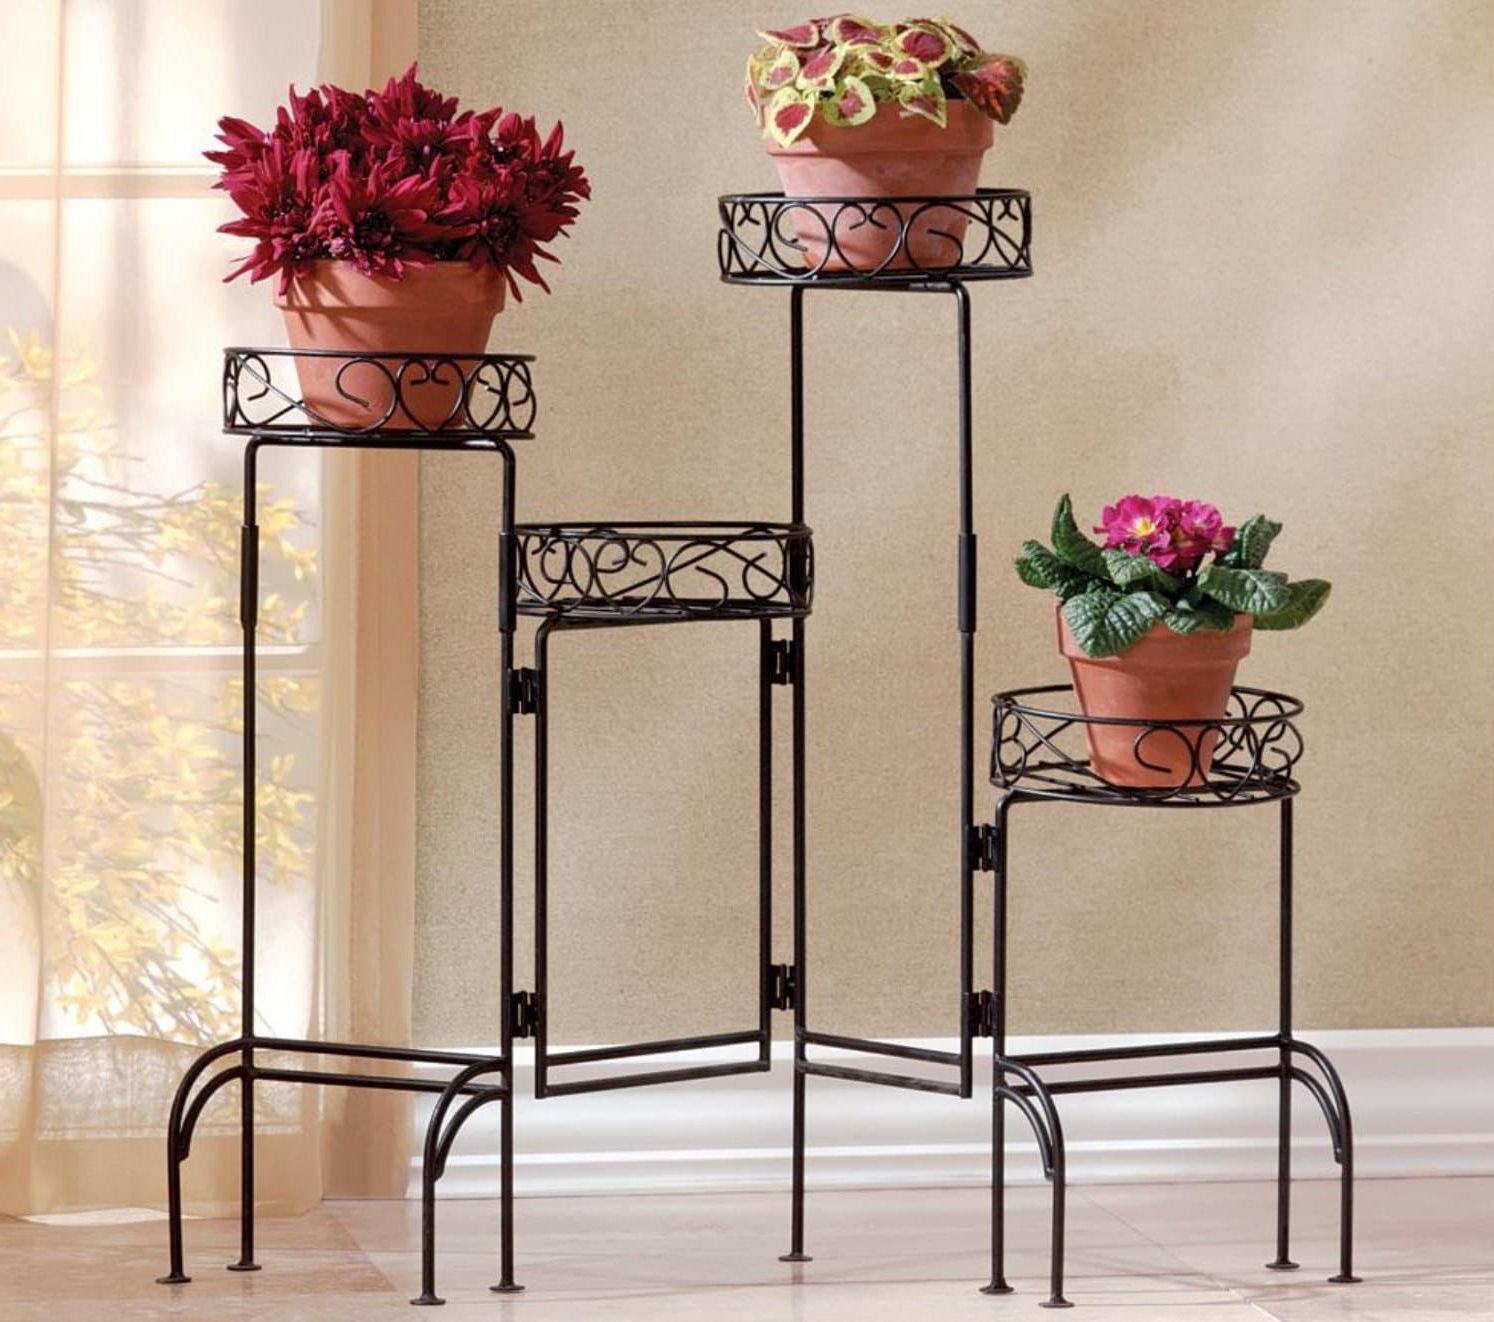 4 Tier Metal Plant Stand Perfect Indoor Outdoor Decor For – Etsy Intended For Famous Four Tier Metal Plant Stands (View 9 of 10)